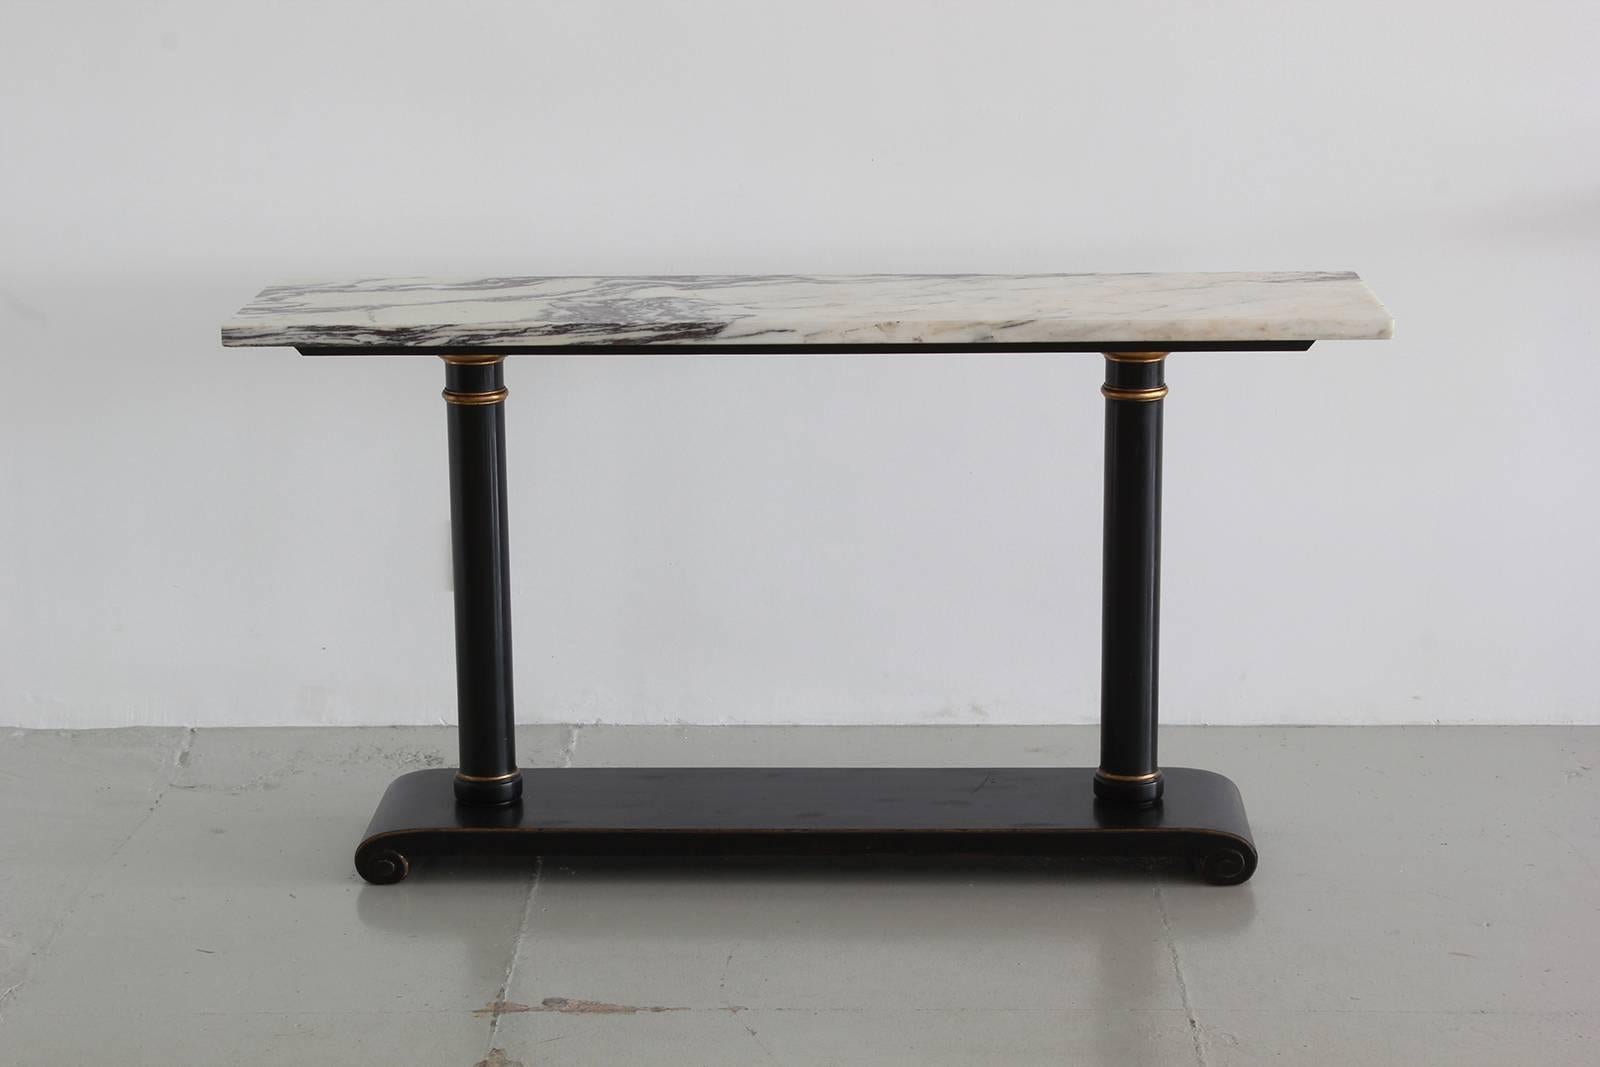 Wonderful Italian marble console with black pedestal column base.
Grain on the marble is fantastic!
Simple modern lines.